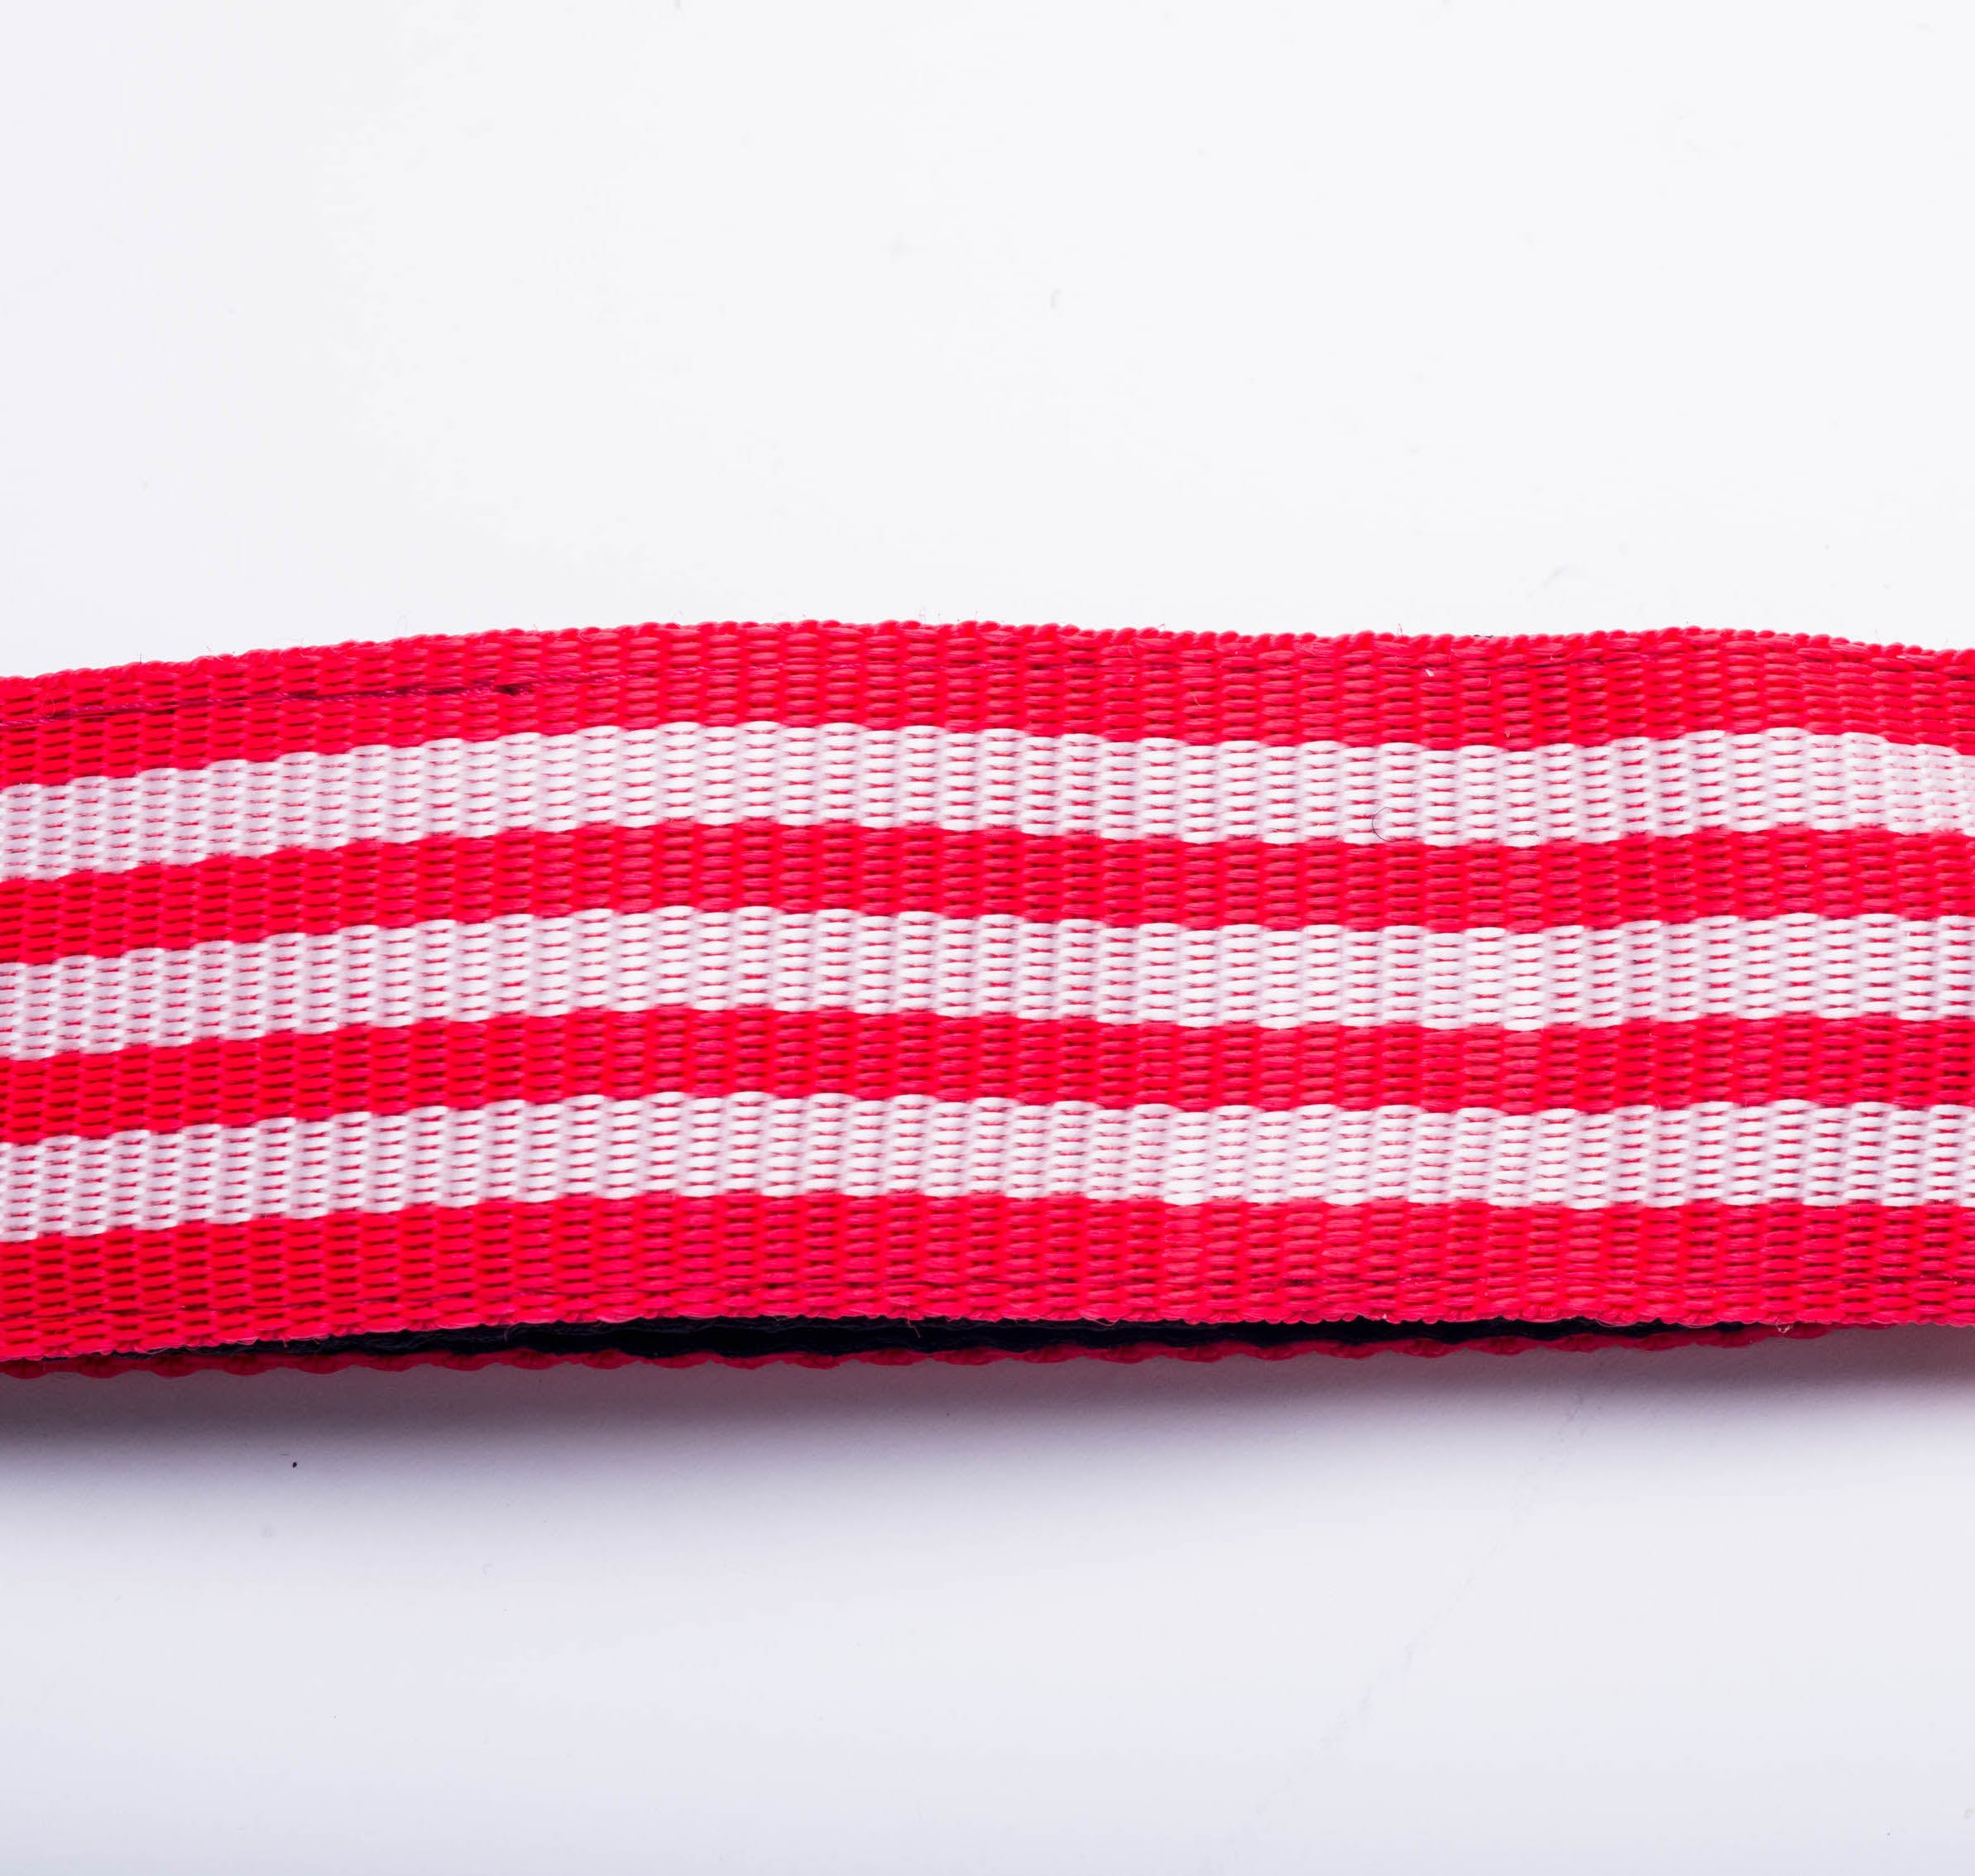 View of red and white samba strap material made by Macapart. 